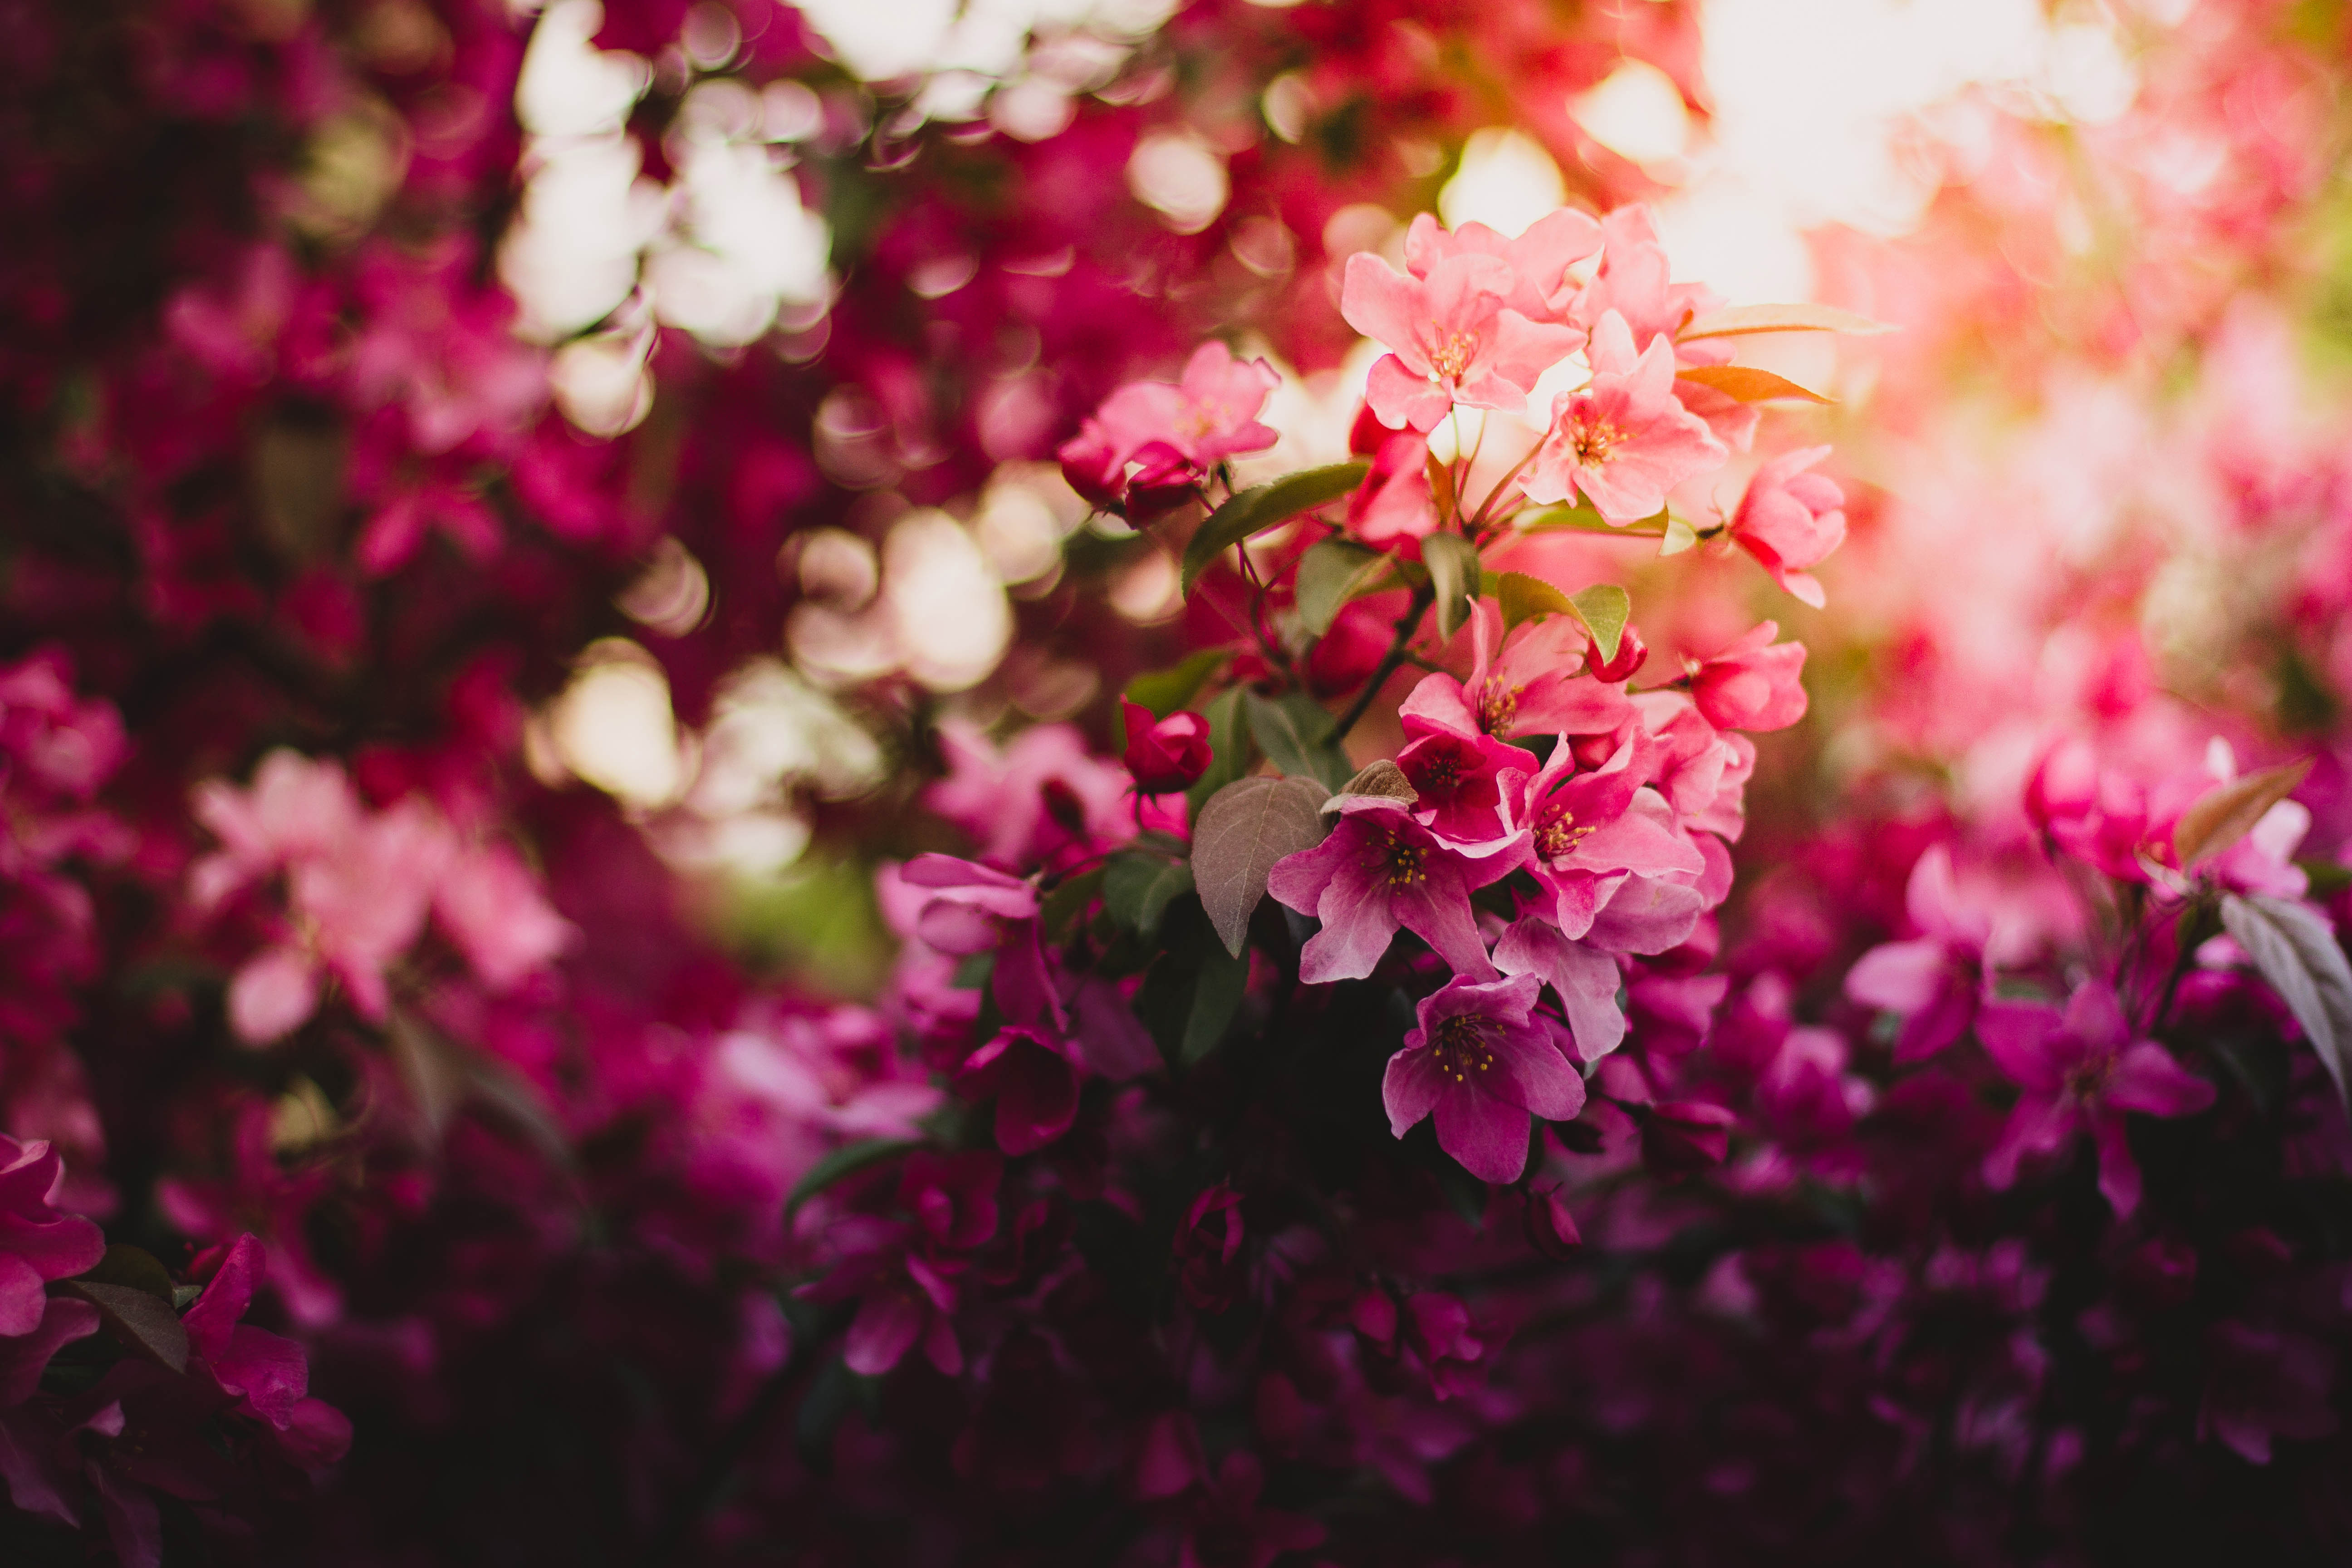 Pink Flowers On Tree 5k, HD Flowers, 4k Wallpapers, Images ...